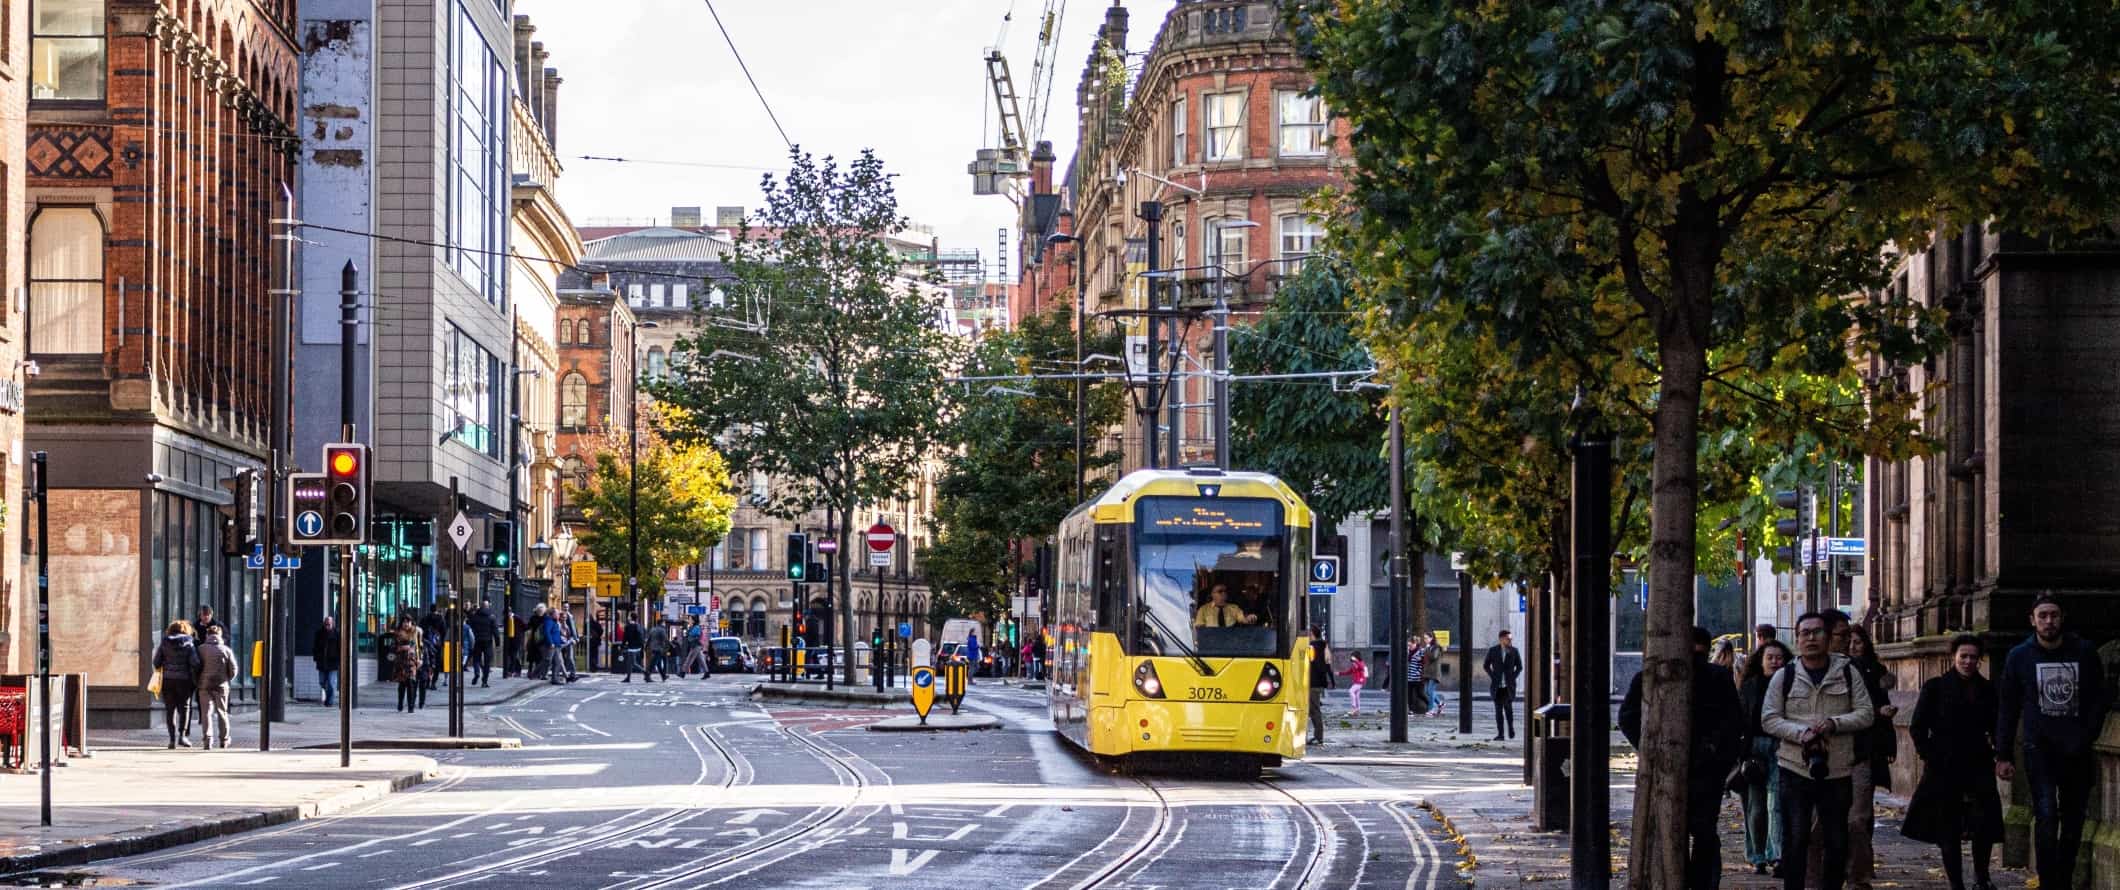 Street view of people walking down the street and a yellow tram passing by in Manchester, England